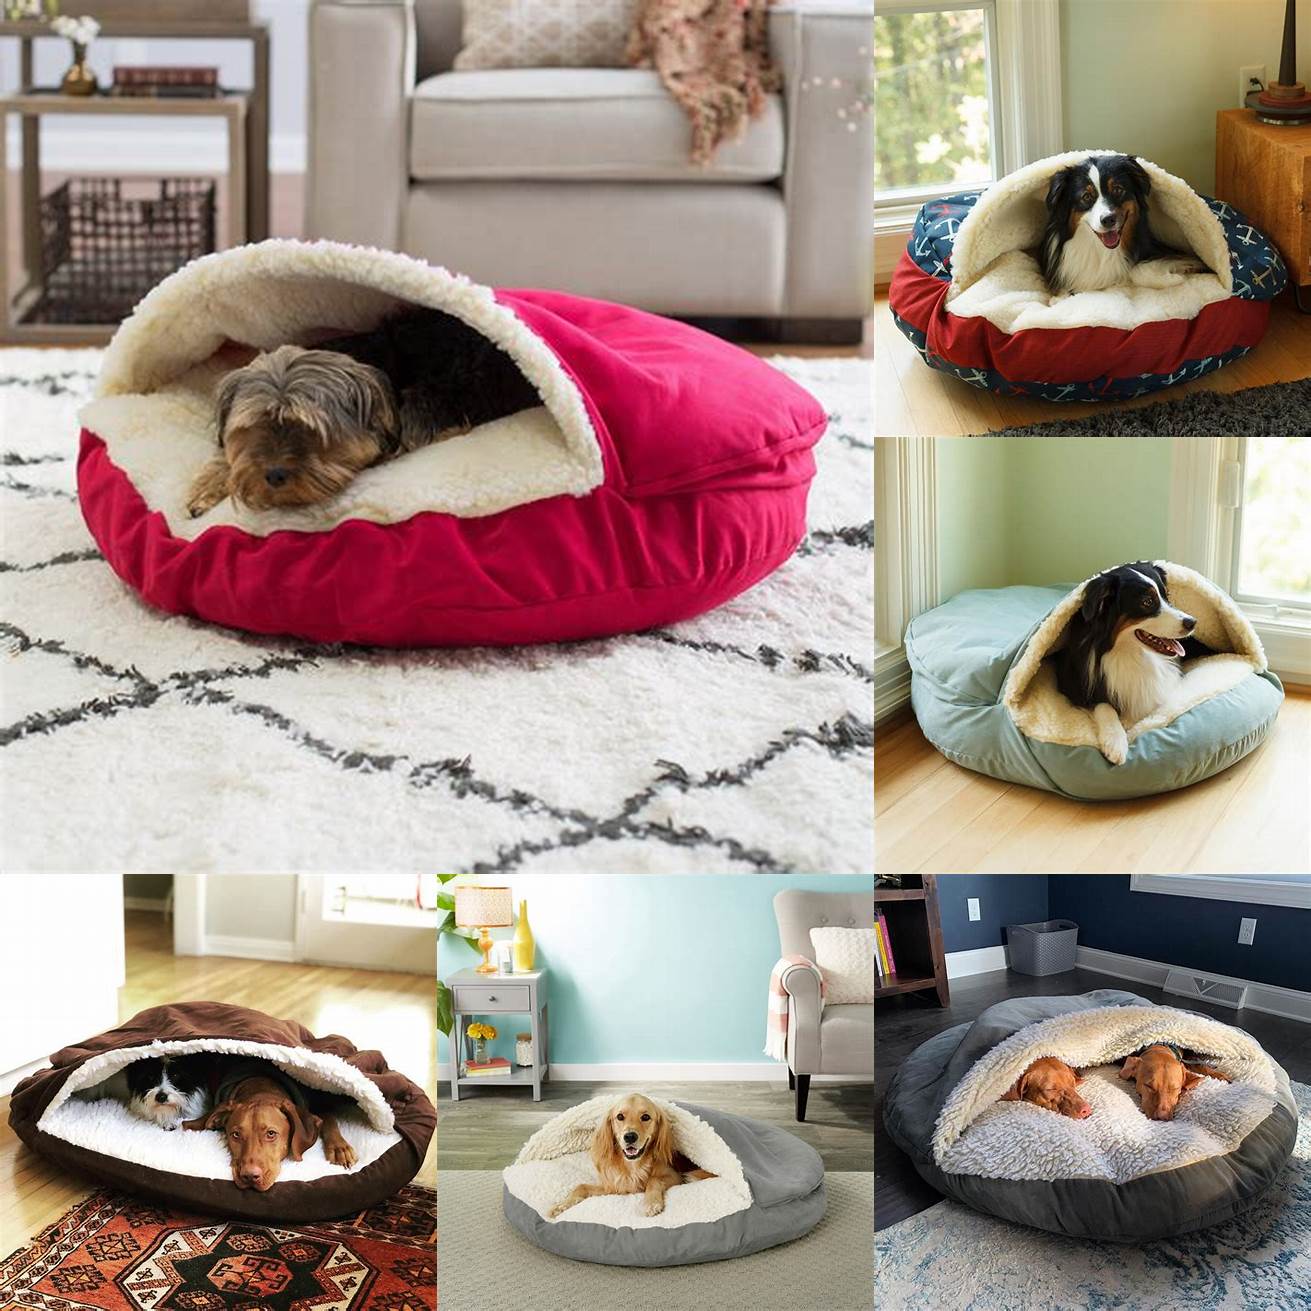 This cozy cave bed is perfect for dogs who love to snuggle and feel secure